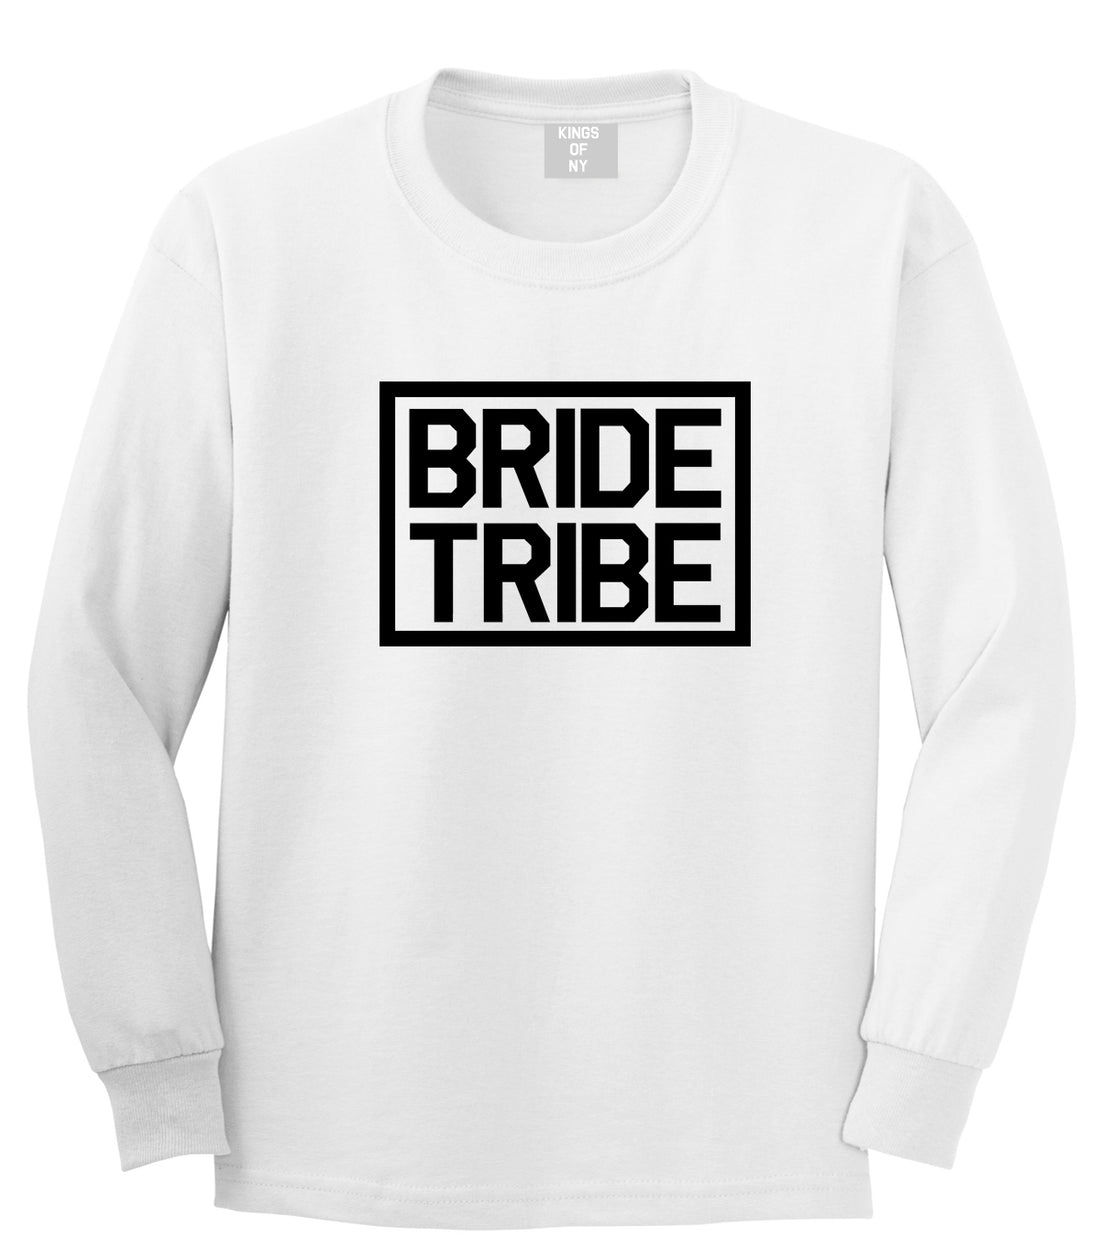 Bride Tribe Bachlorette Party White Long Sleeve T-Shirt by Kings Of NY